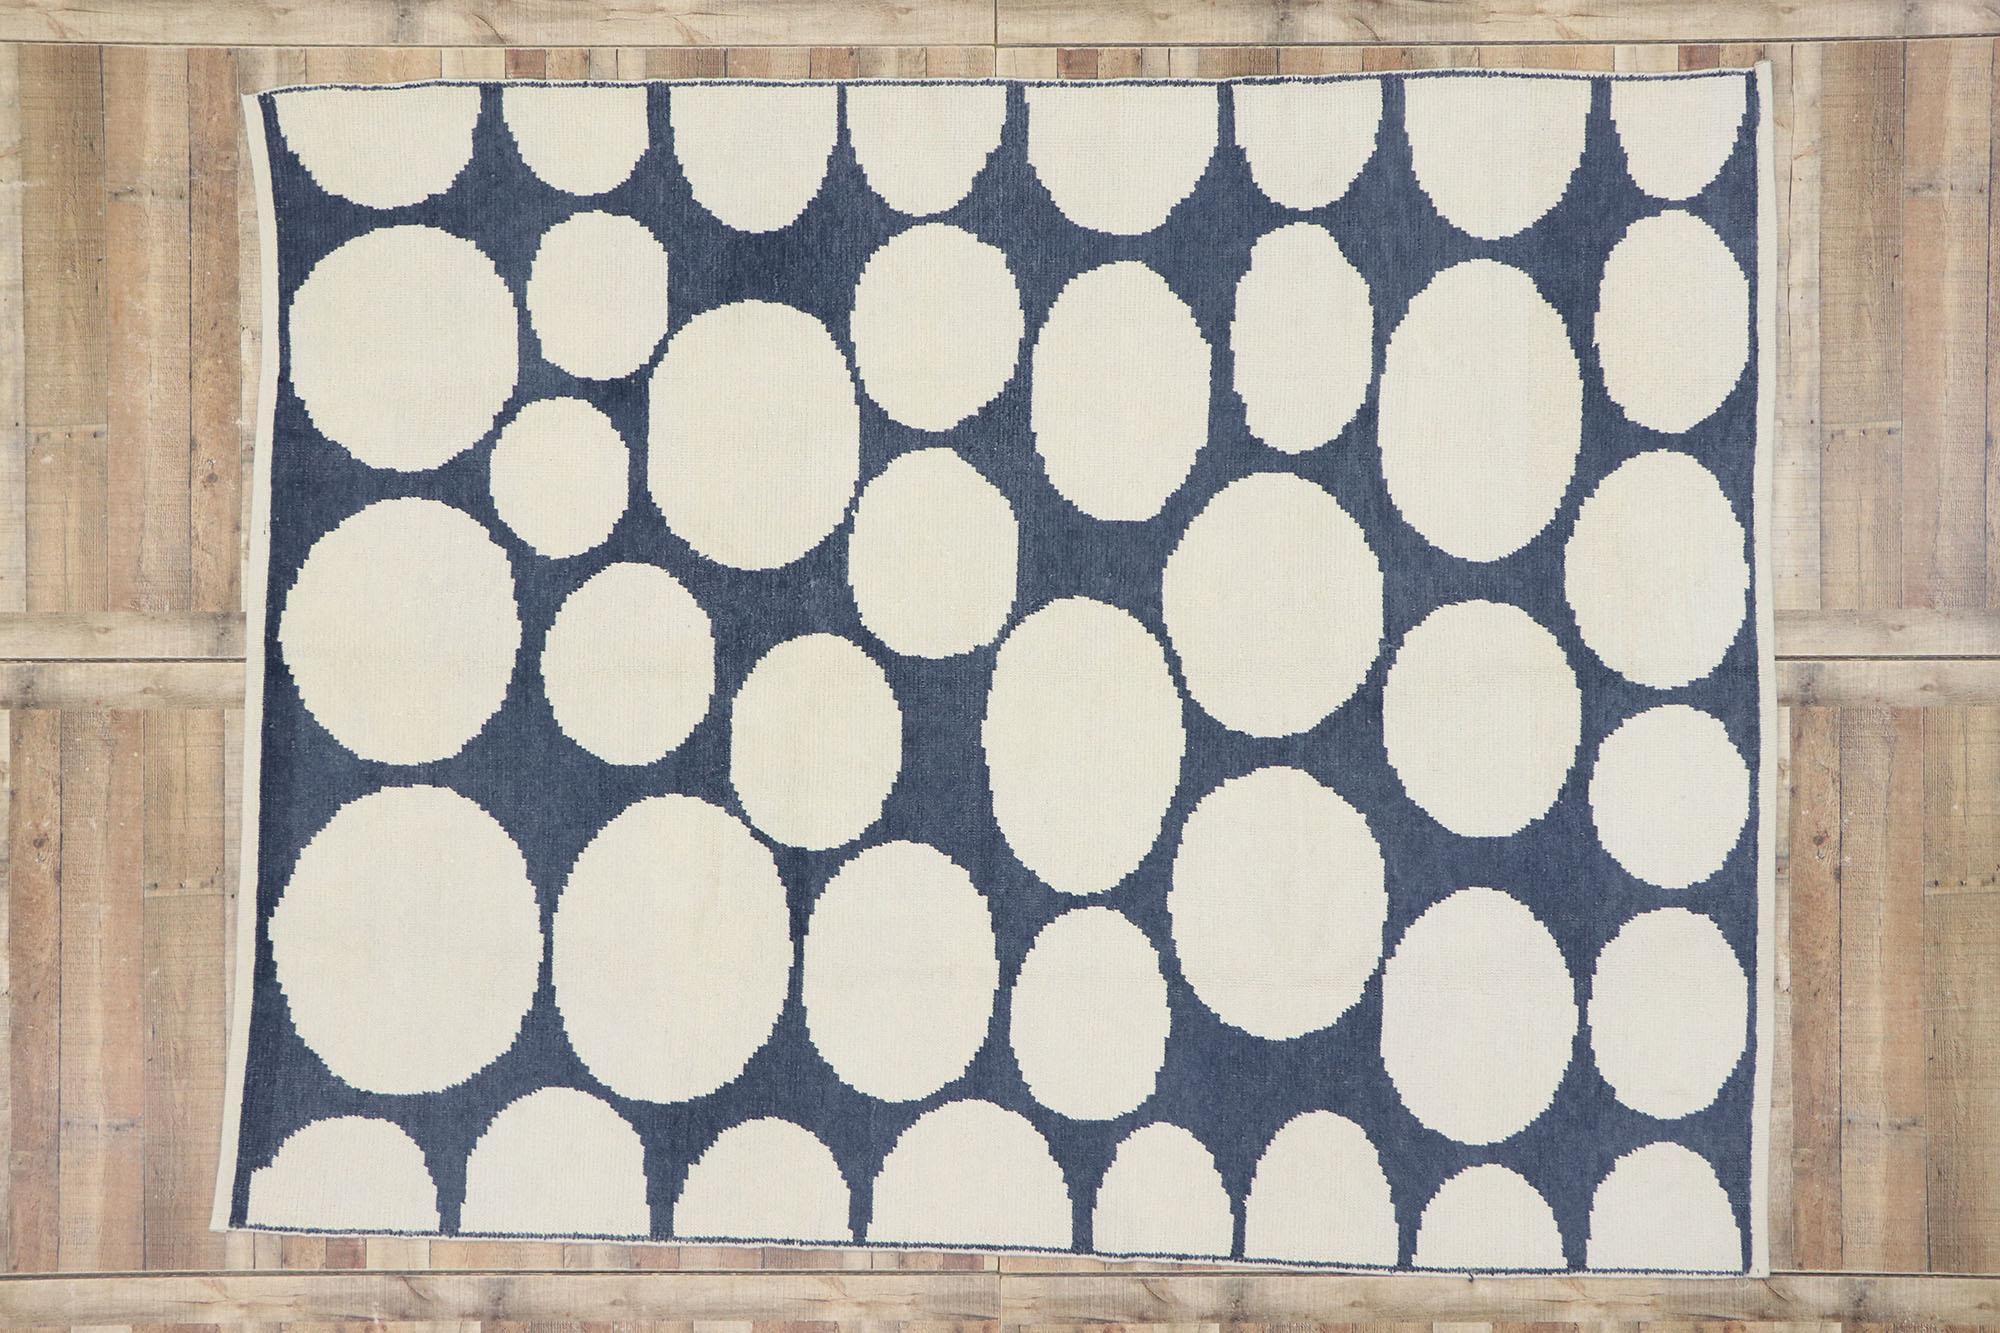 Hand-Knotted New Contemporary Moroccan Polka Dot Orphism Style Rug Inspired by Yayoi Kusama